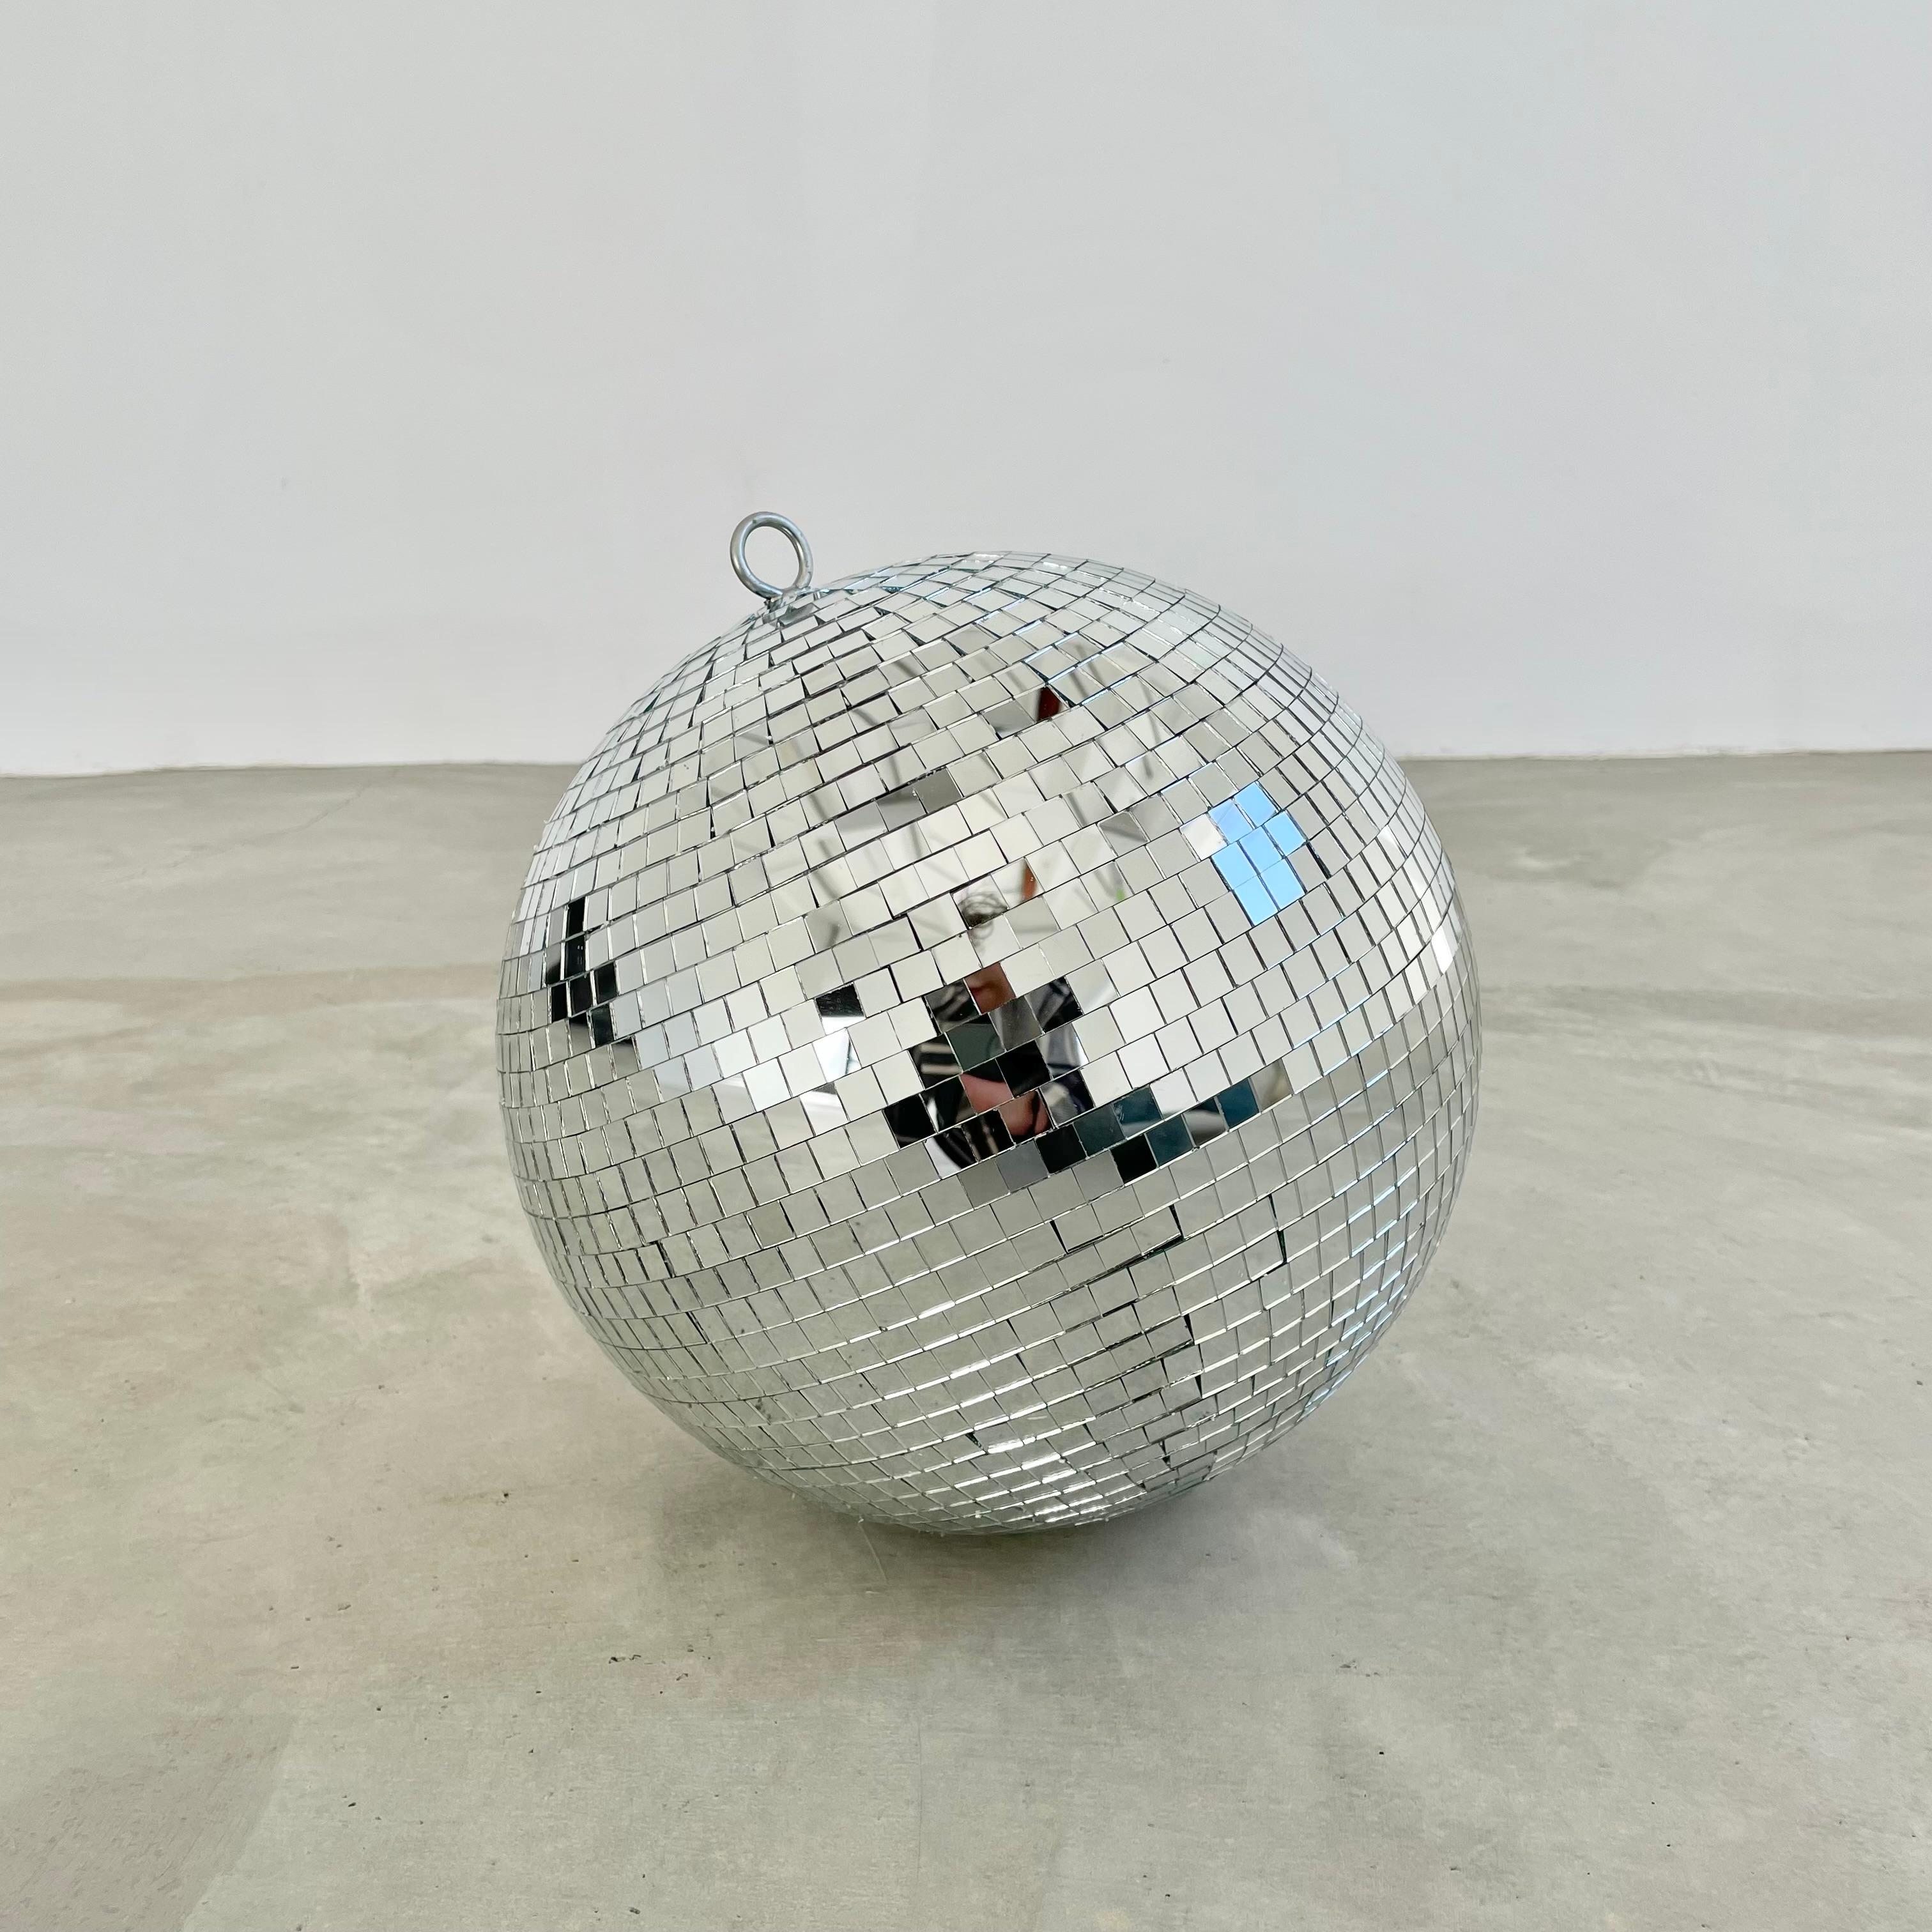 Great retro disco ball made out of individually cut square pieces of glass. Great condition. Illuminates beautifully. Has a metal ring at the top to connect to a string, rope or chain. Great universal size and presence. No chips or cracks to glass